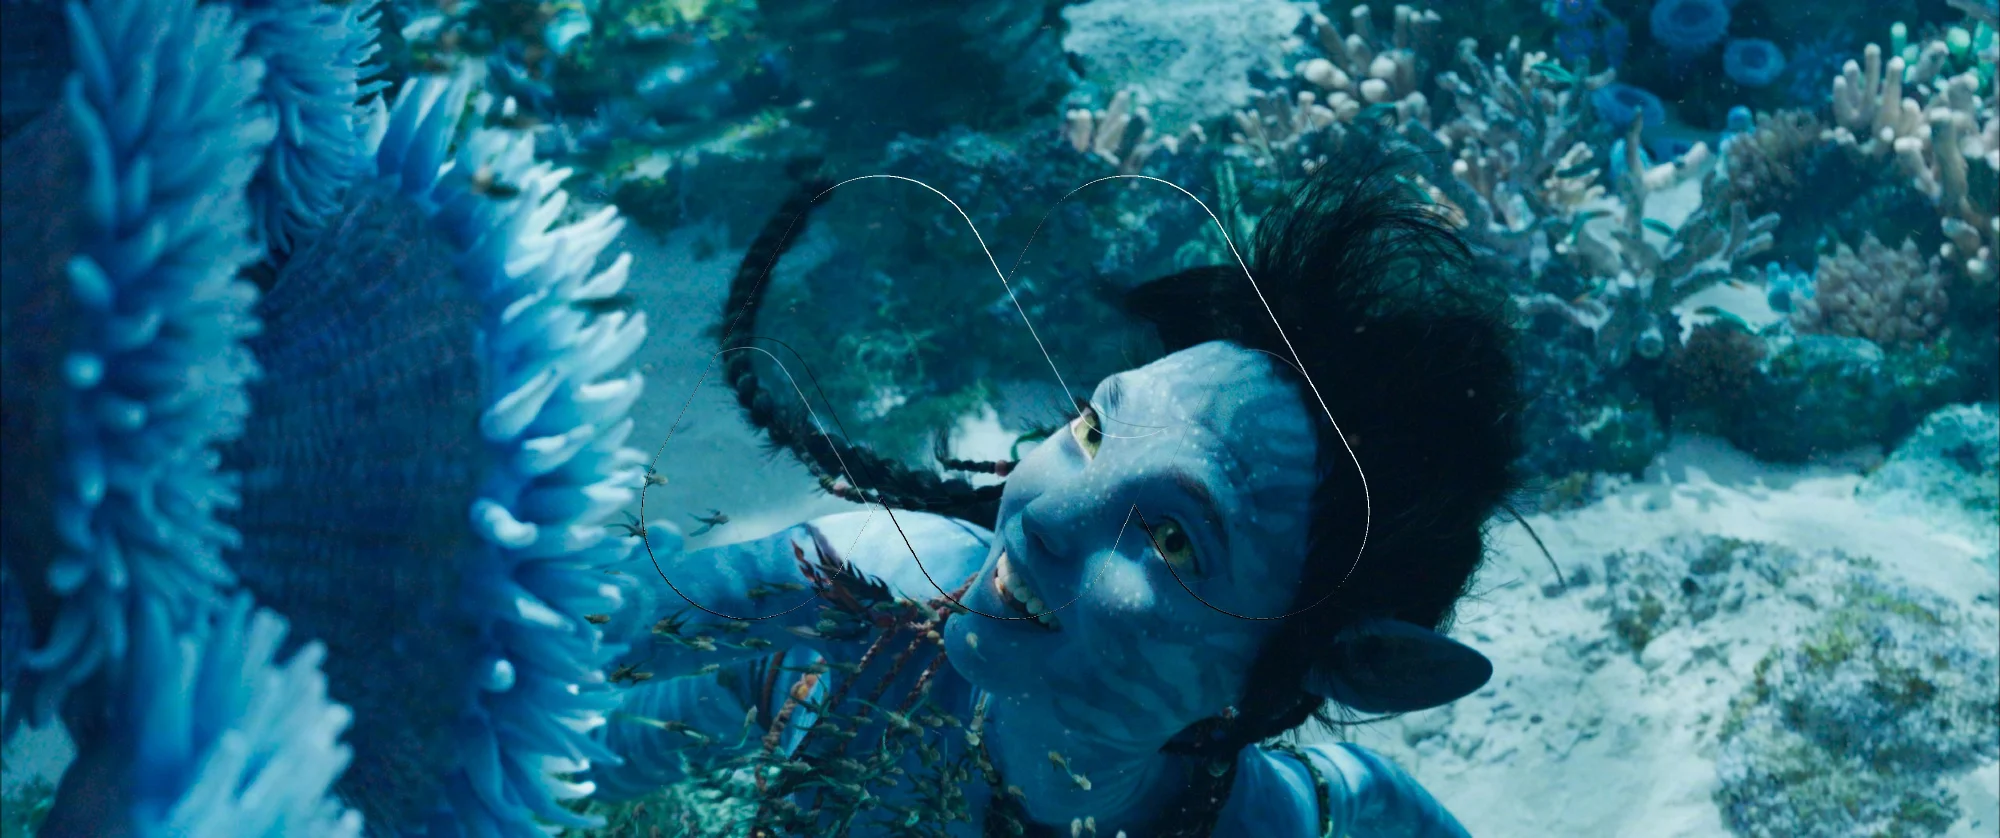 avatar-the-way-of-water-exposes-massive-new-stills-9